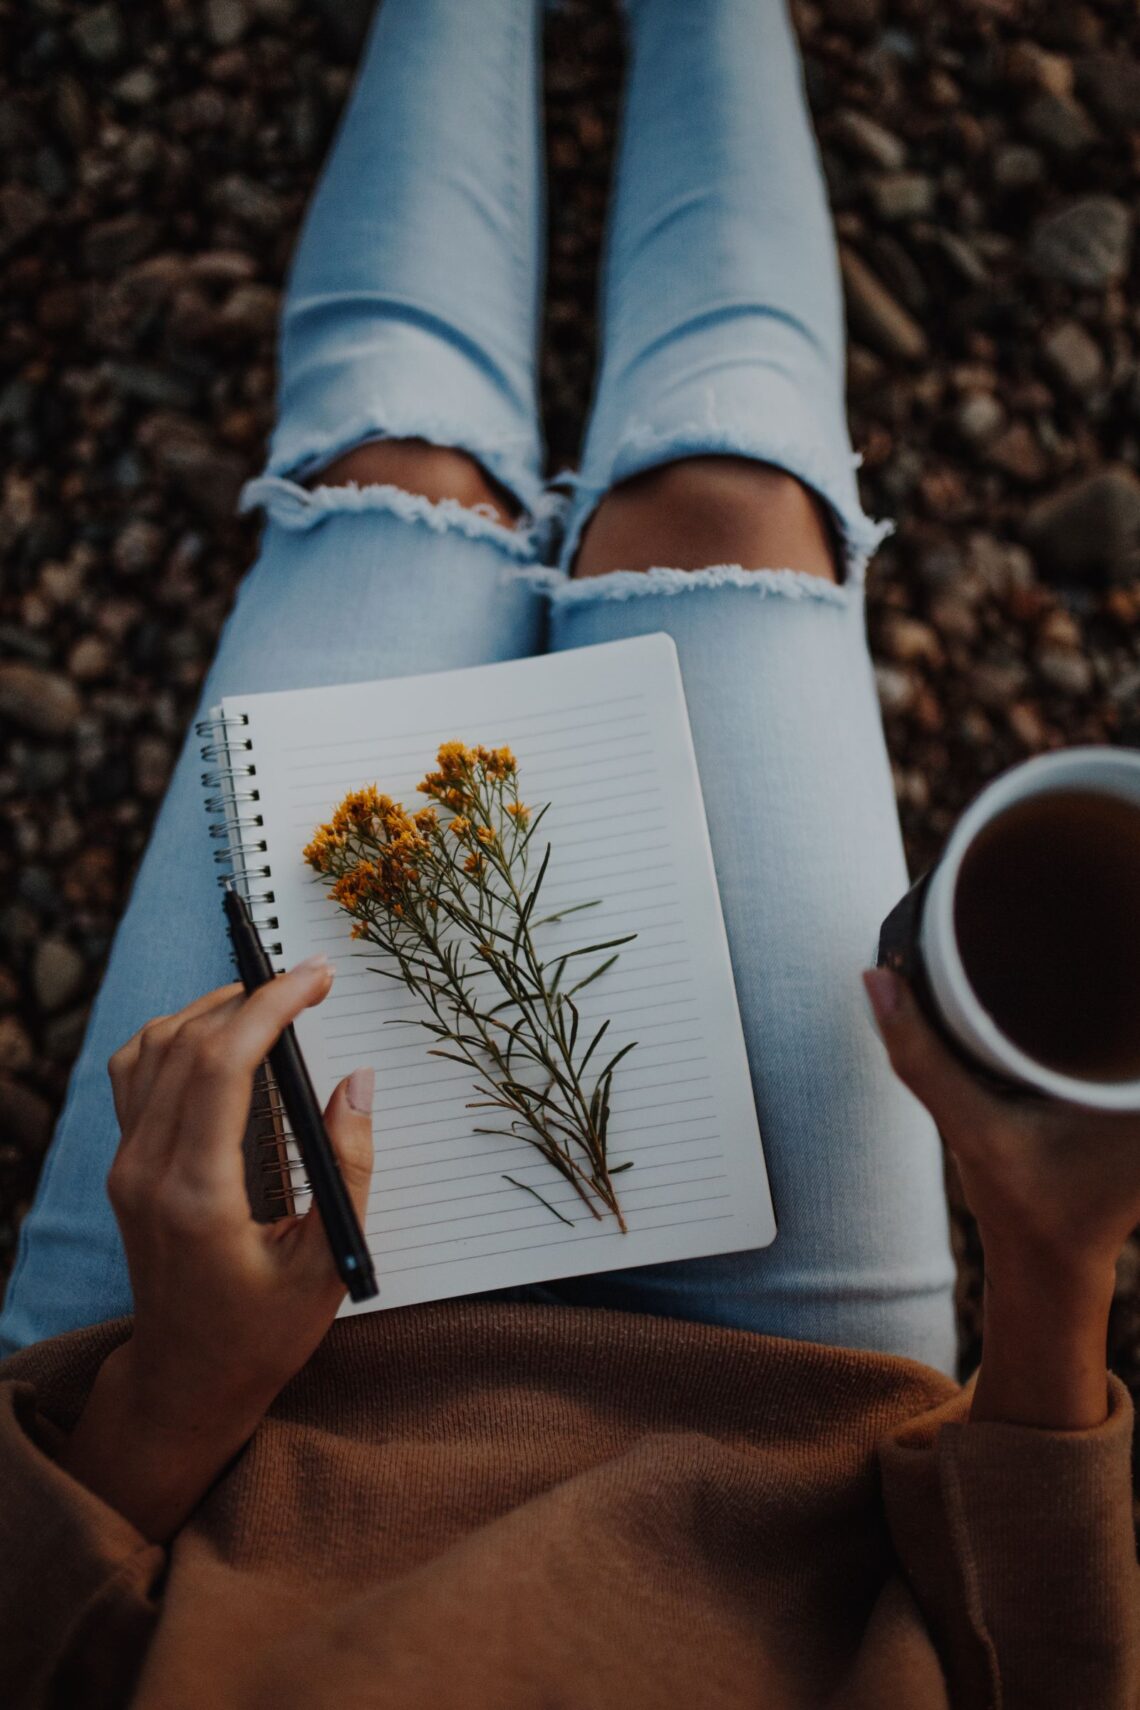 Woman sitting on the ground holding a mug of coffee and a journal with a yellow flower on it